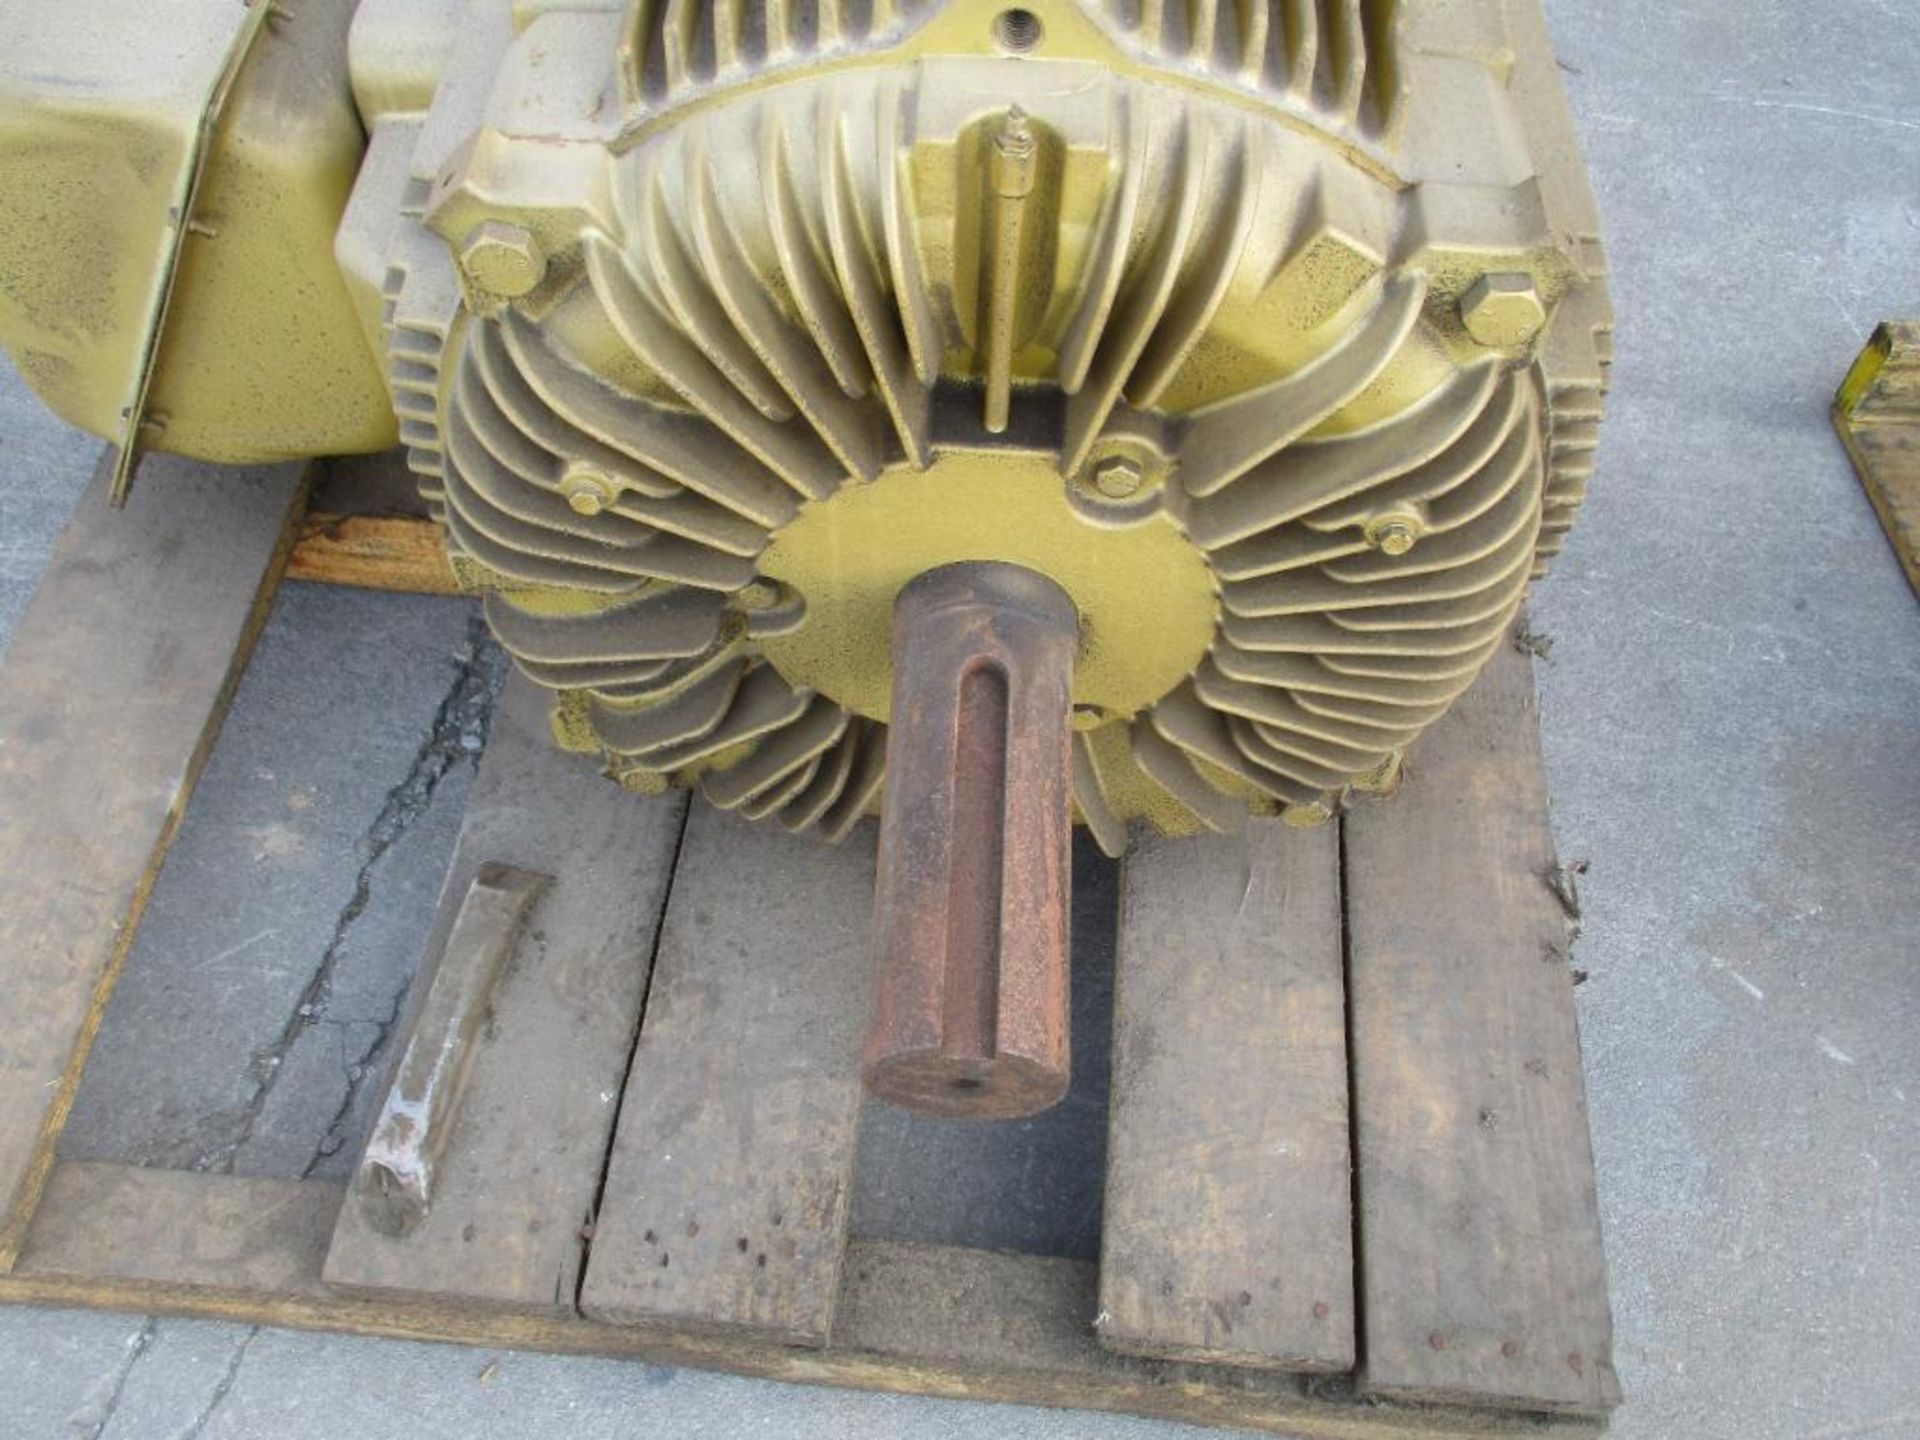 BALDOR 3 PHASE 150HP 1785RPM 445T FRAME A/C MOTOR P/N EM4406T-4 2006# LBS (THIS LOT IS FOB KNOXVILLE - Image 5 of 5